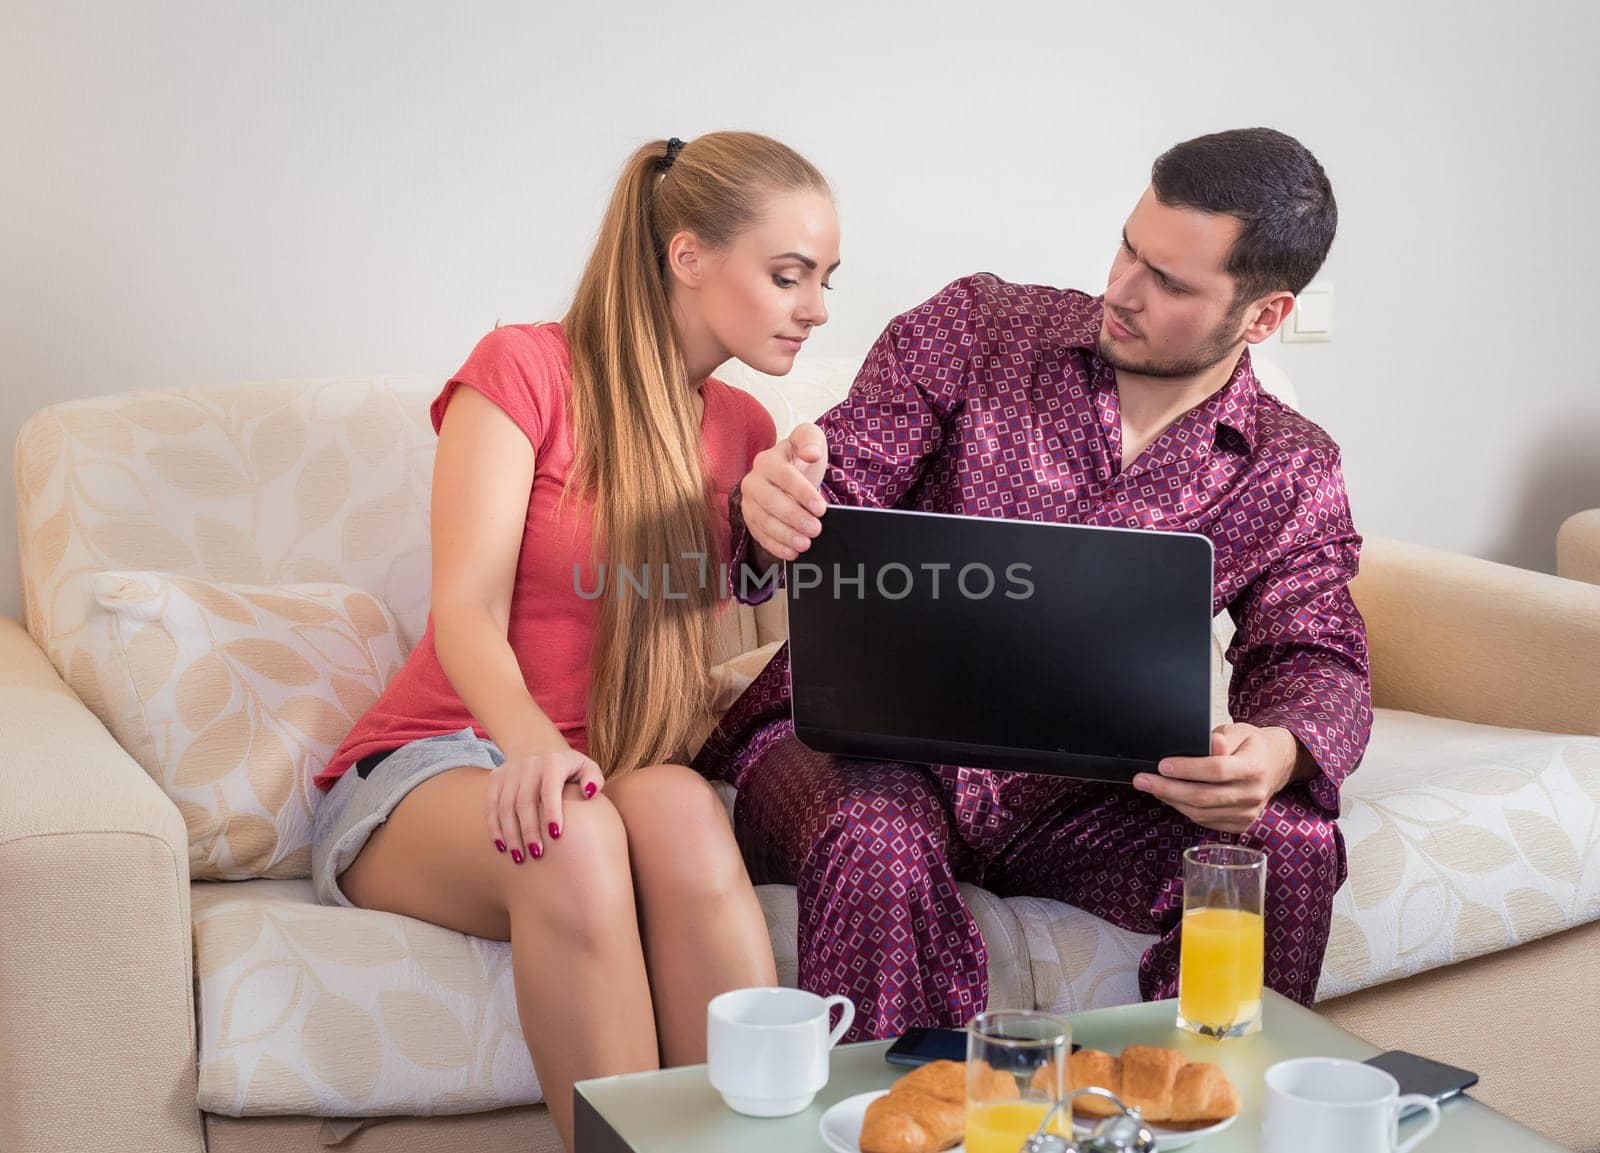 Cute young couple on the couch having breakfast, eating croissants, drinking orange juice in front of a laptop computer